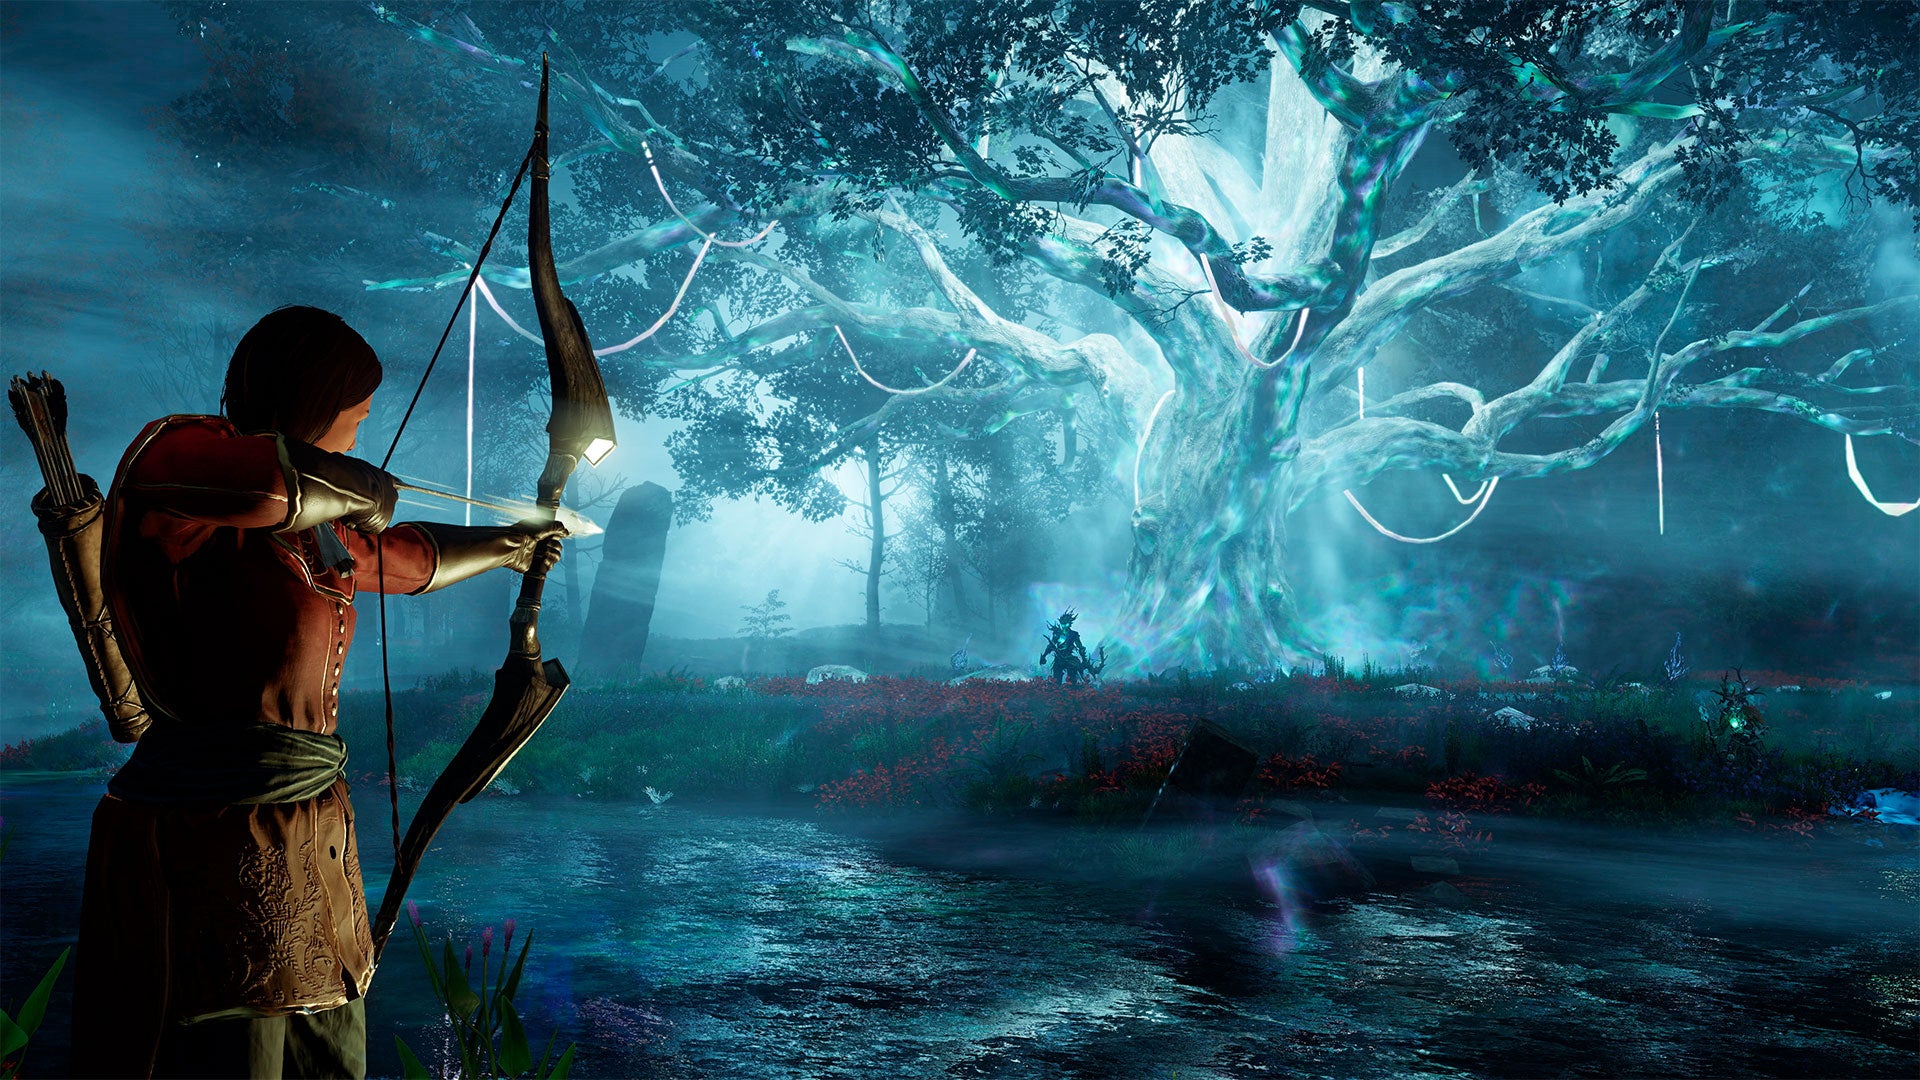 New World: A glowing blue Azoth Tree stands at the focal point of the screenshot, with a twisted creature standing near it. Close to the camera, a huntress aims an arrow at the creature.